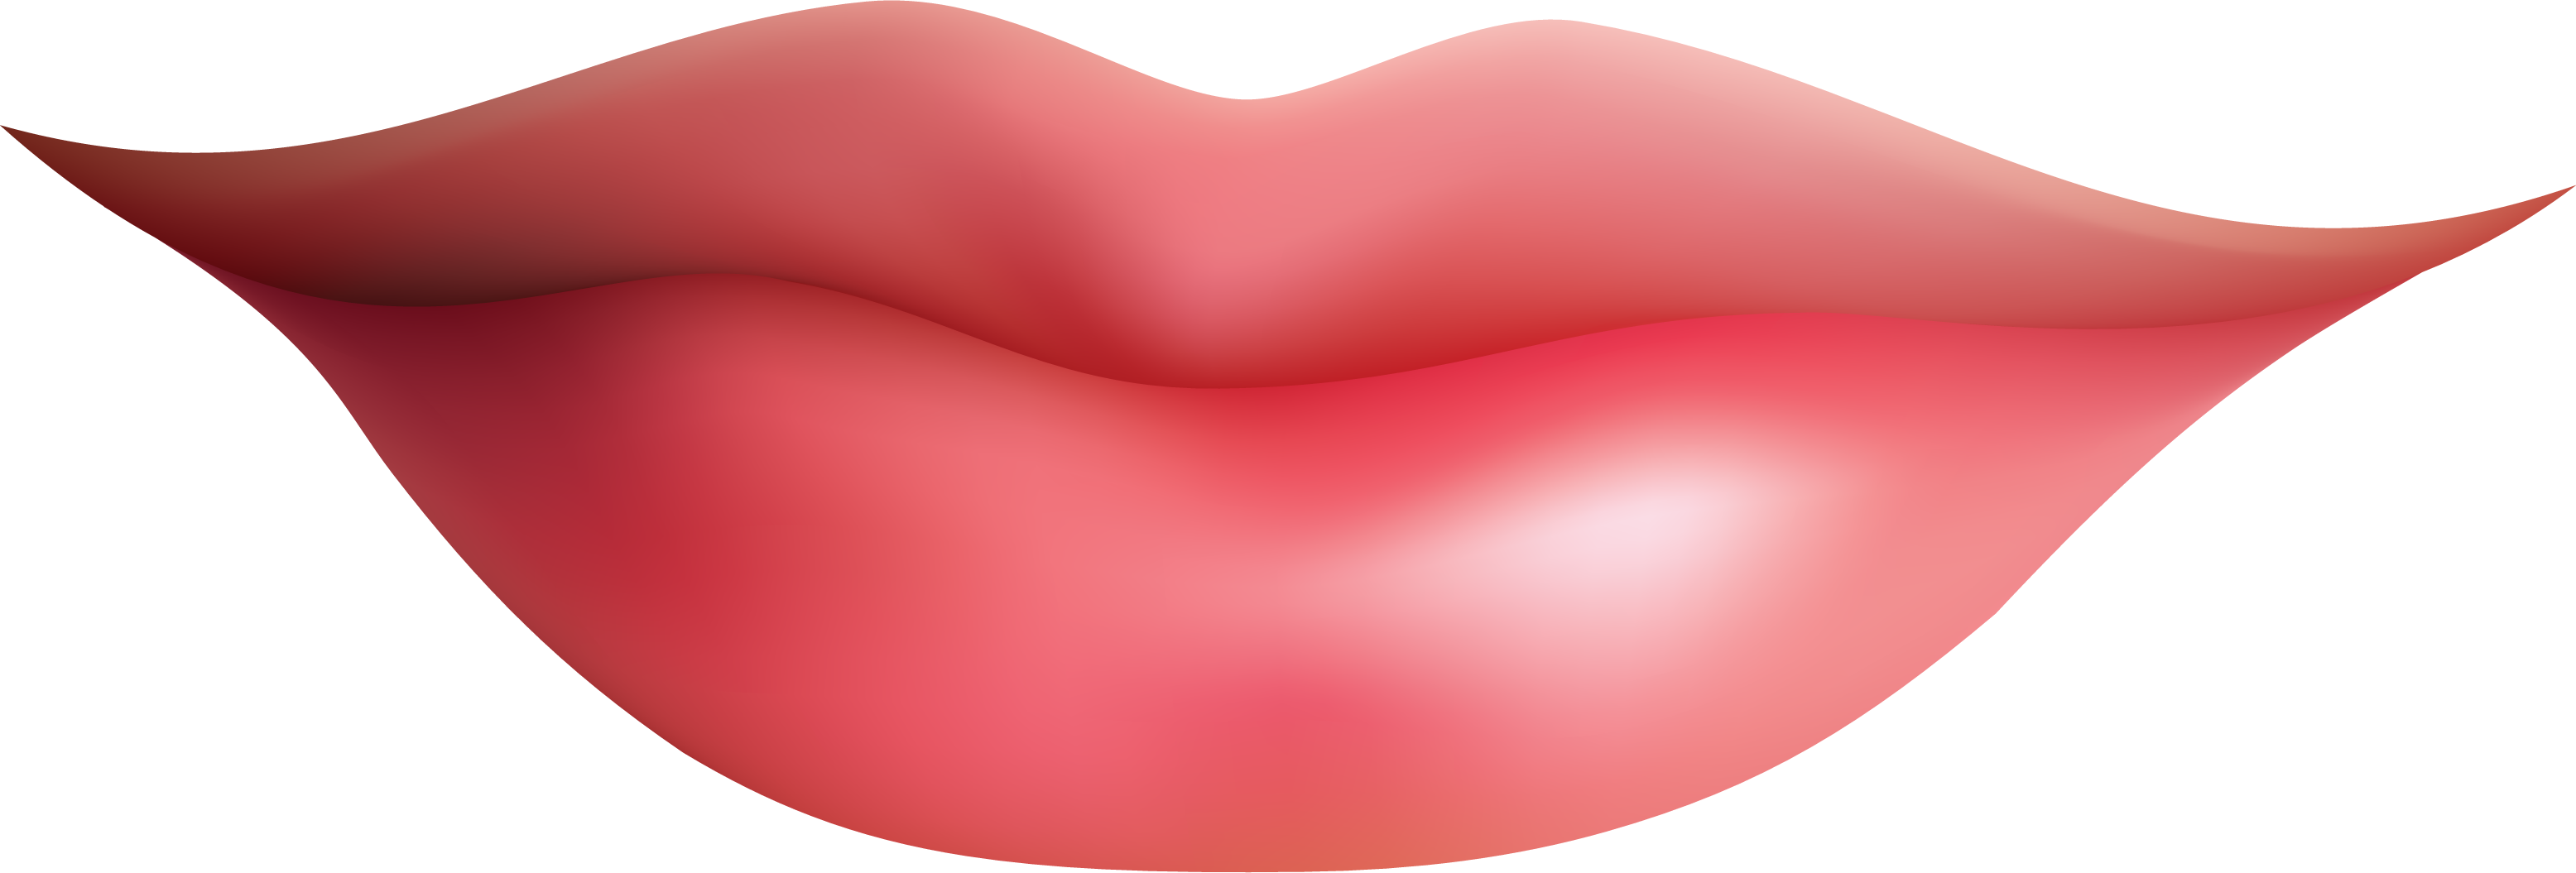 Clipart Lips Clipart Image - Shhh Lips, Transparent background PNG HD thumbnail